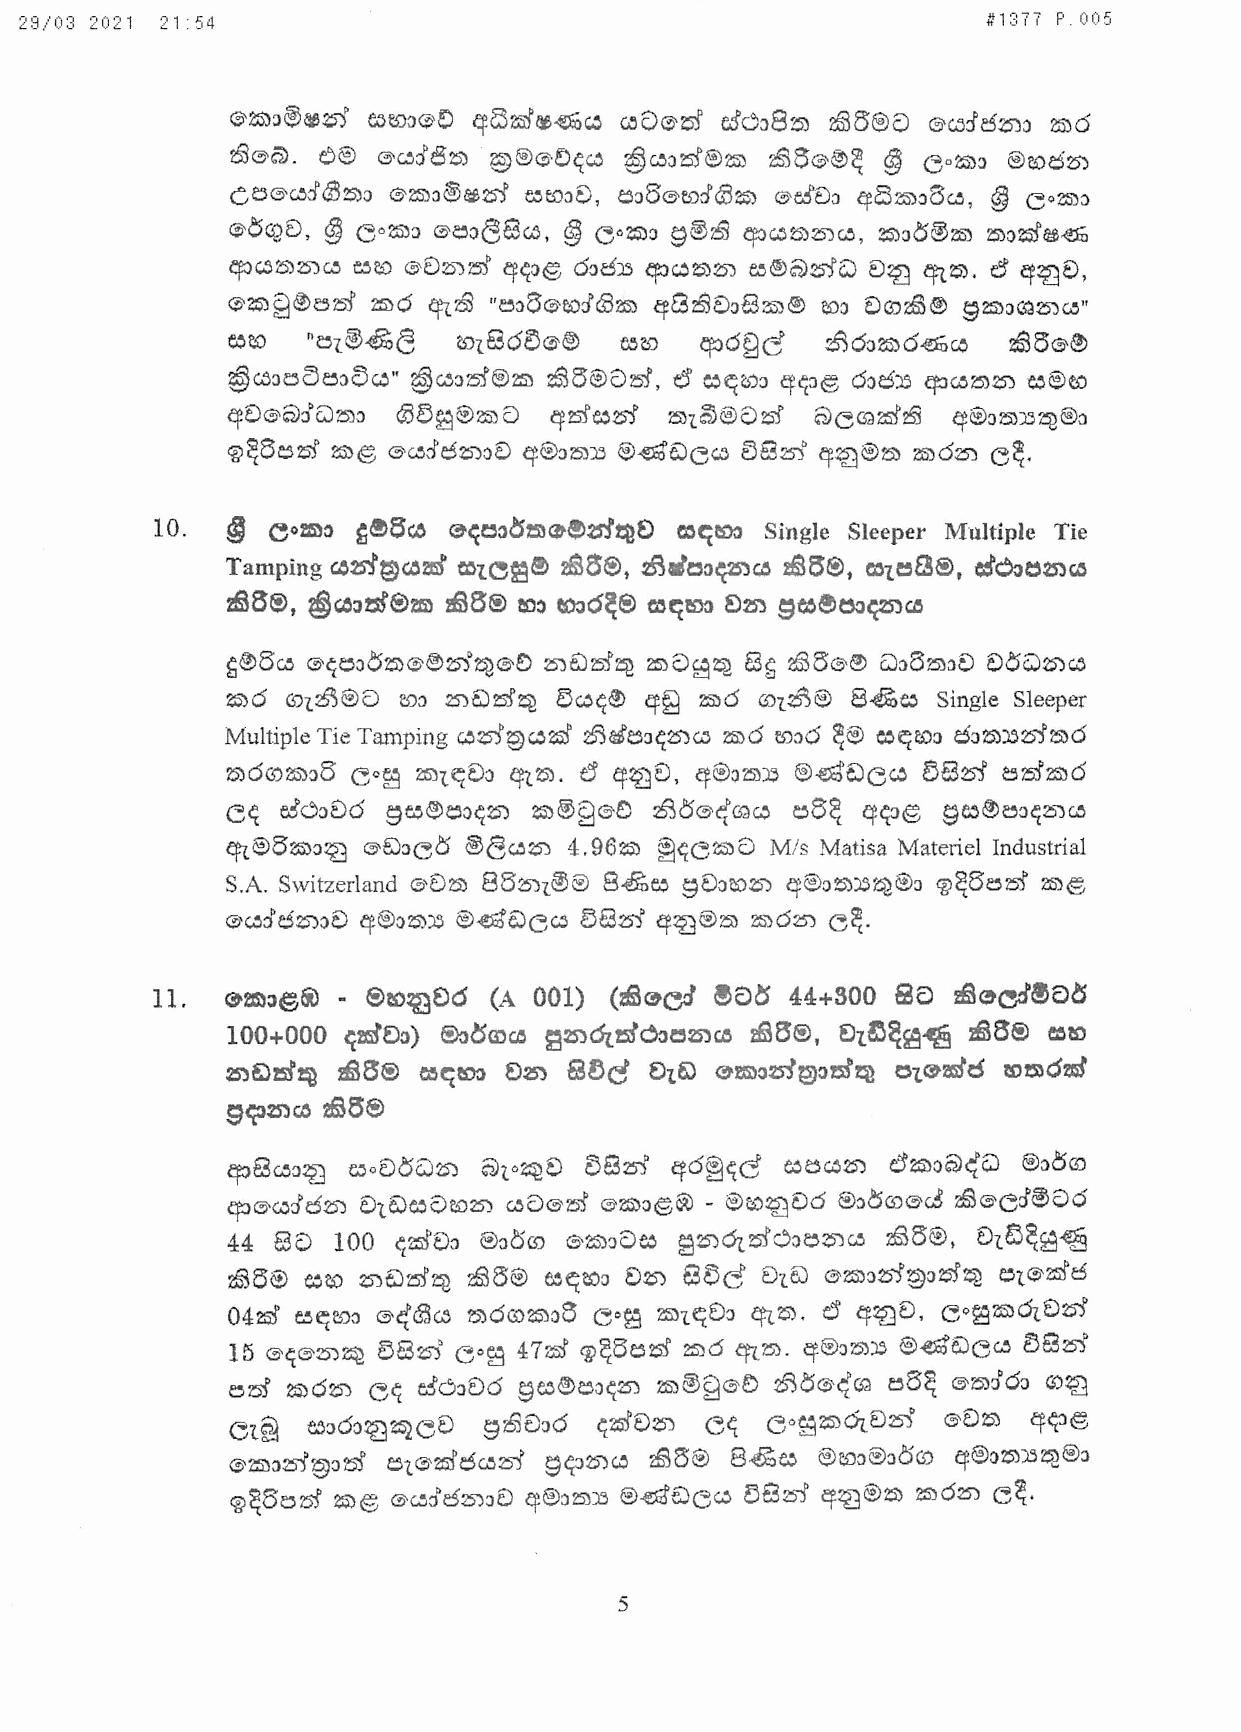 Cabinet Decision on 29.03.2021 1 page 005